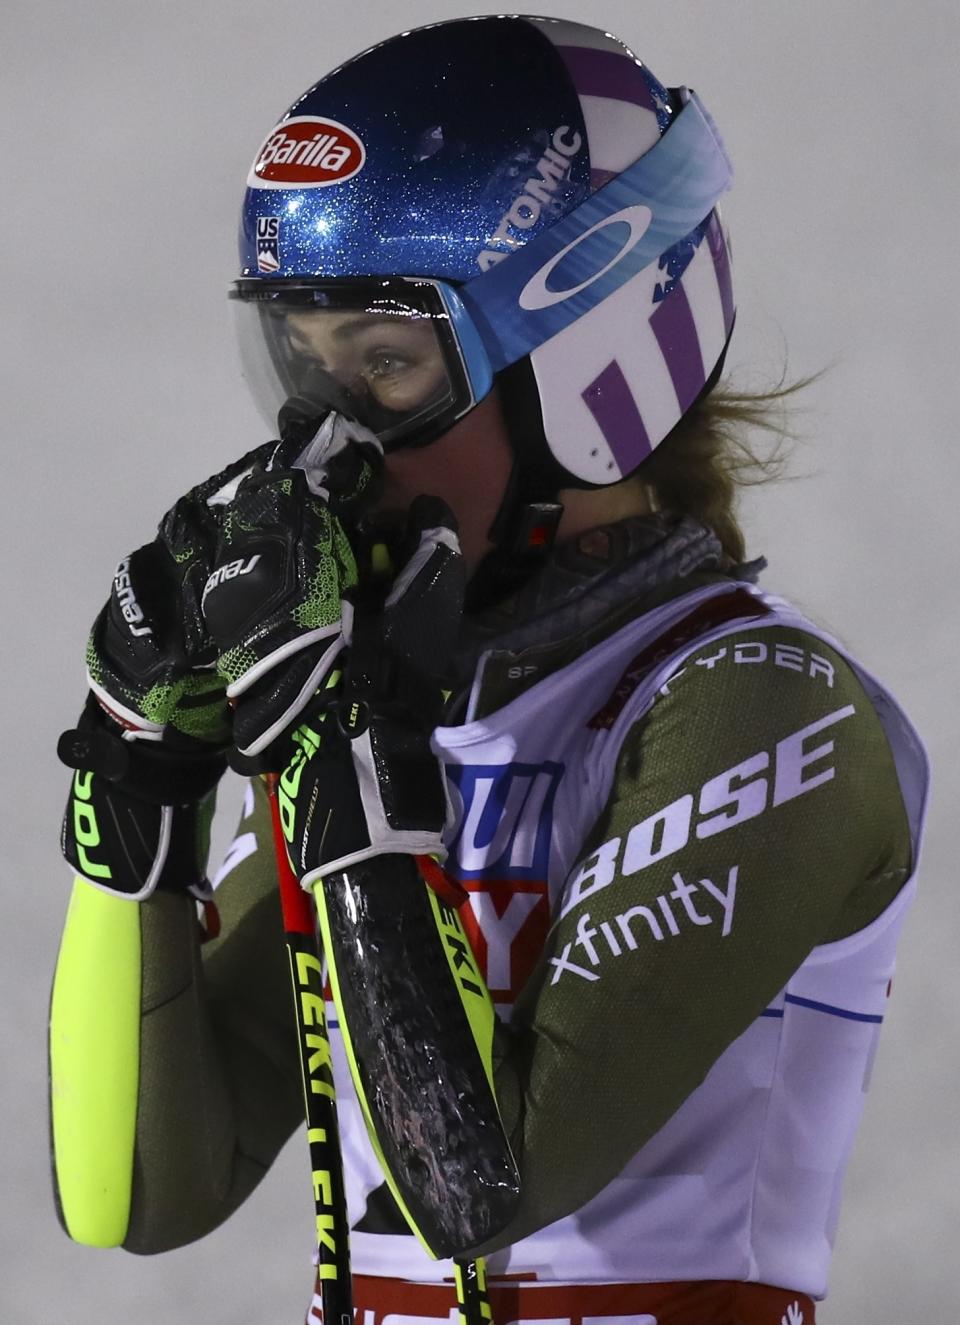 United States' Mikaela Shiffrin reacts after finishing third in the women's giant slalom, at the alpine ski World Championships in Are, Sweden, Thursday, Feb. 14, 2019. (AP Photo/Alessandro Trovati)